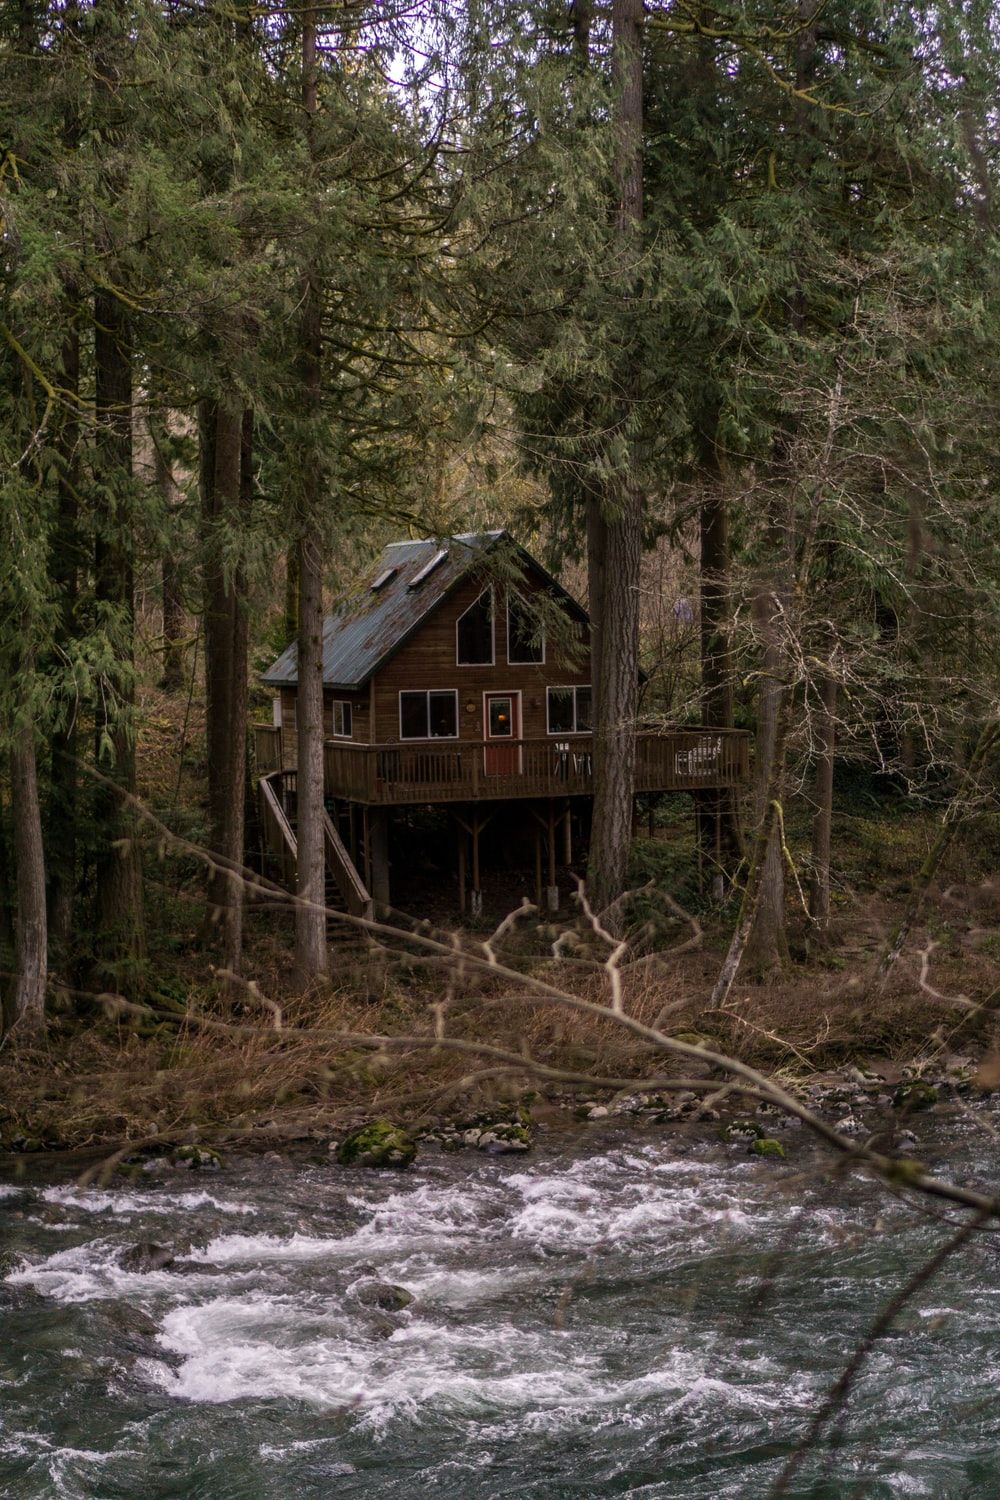 Cabin In Woods Picture. Download Free Image